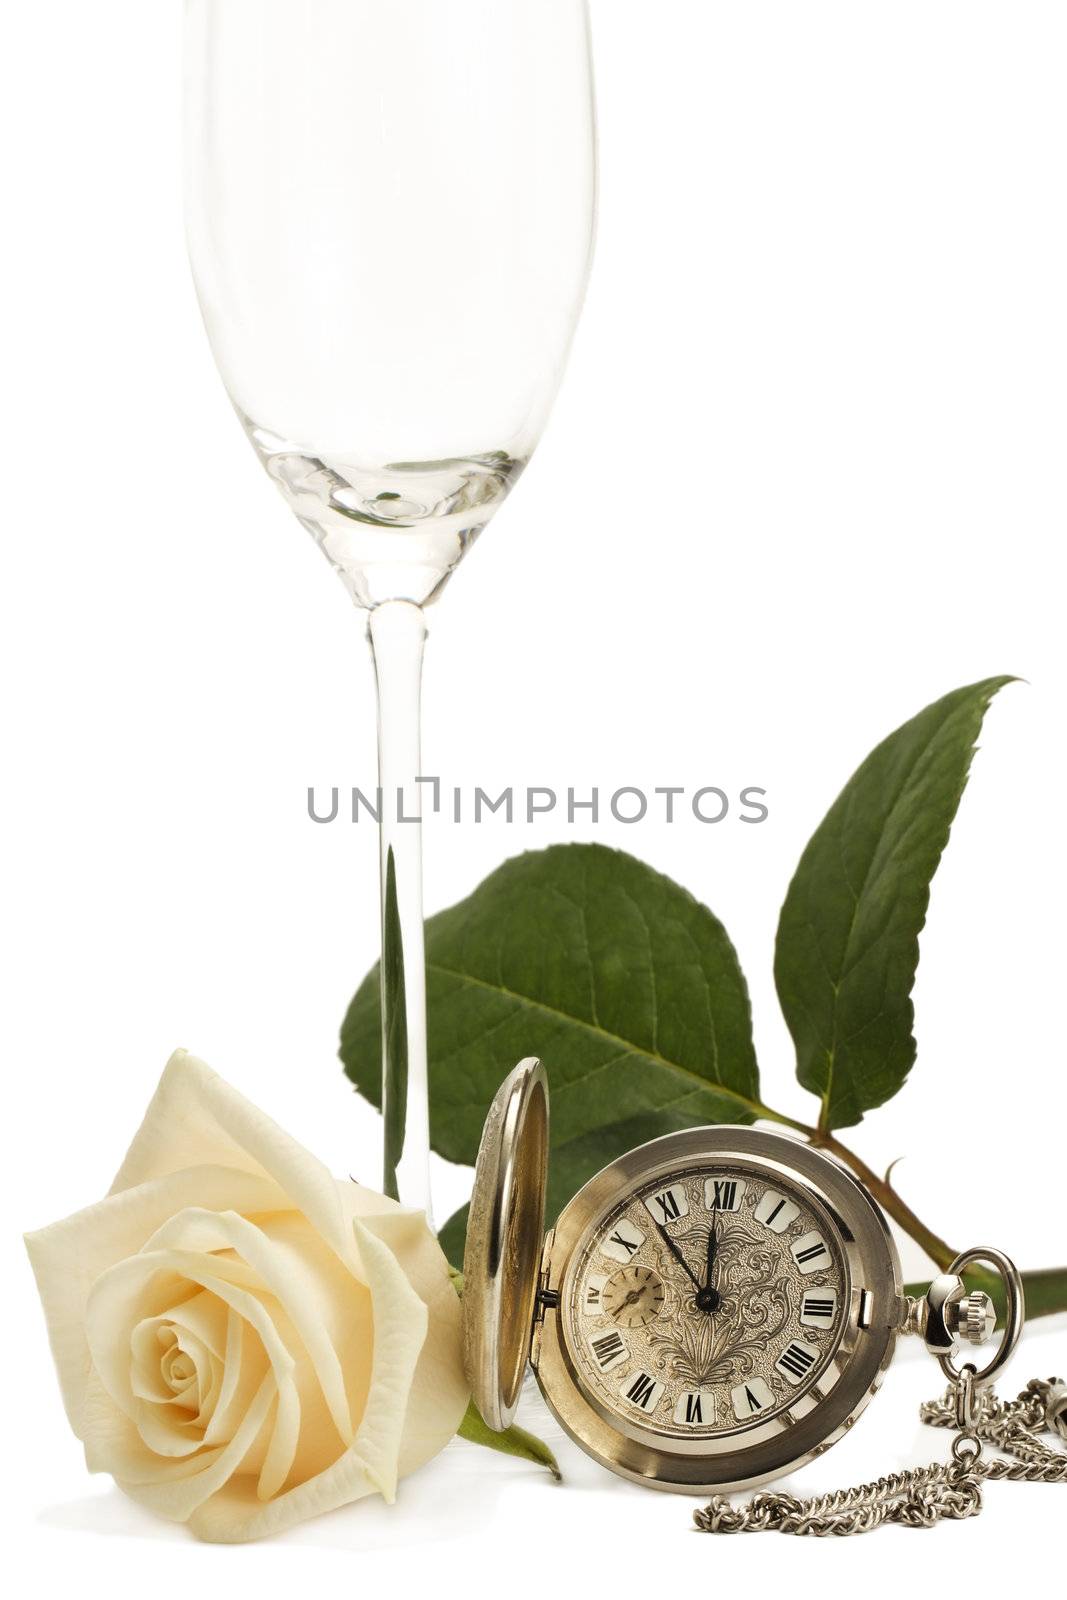 creamy rose with a old pocket watch and a empty champagne glass on white background